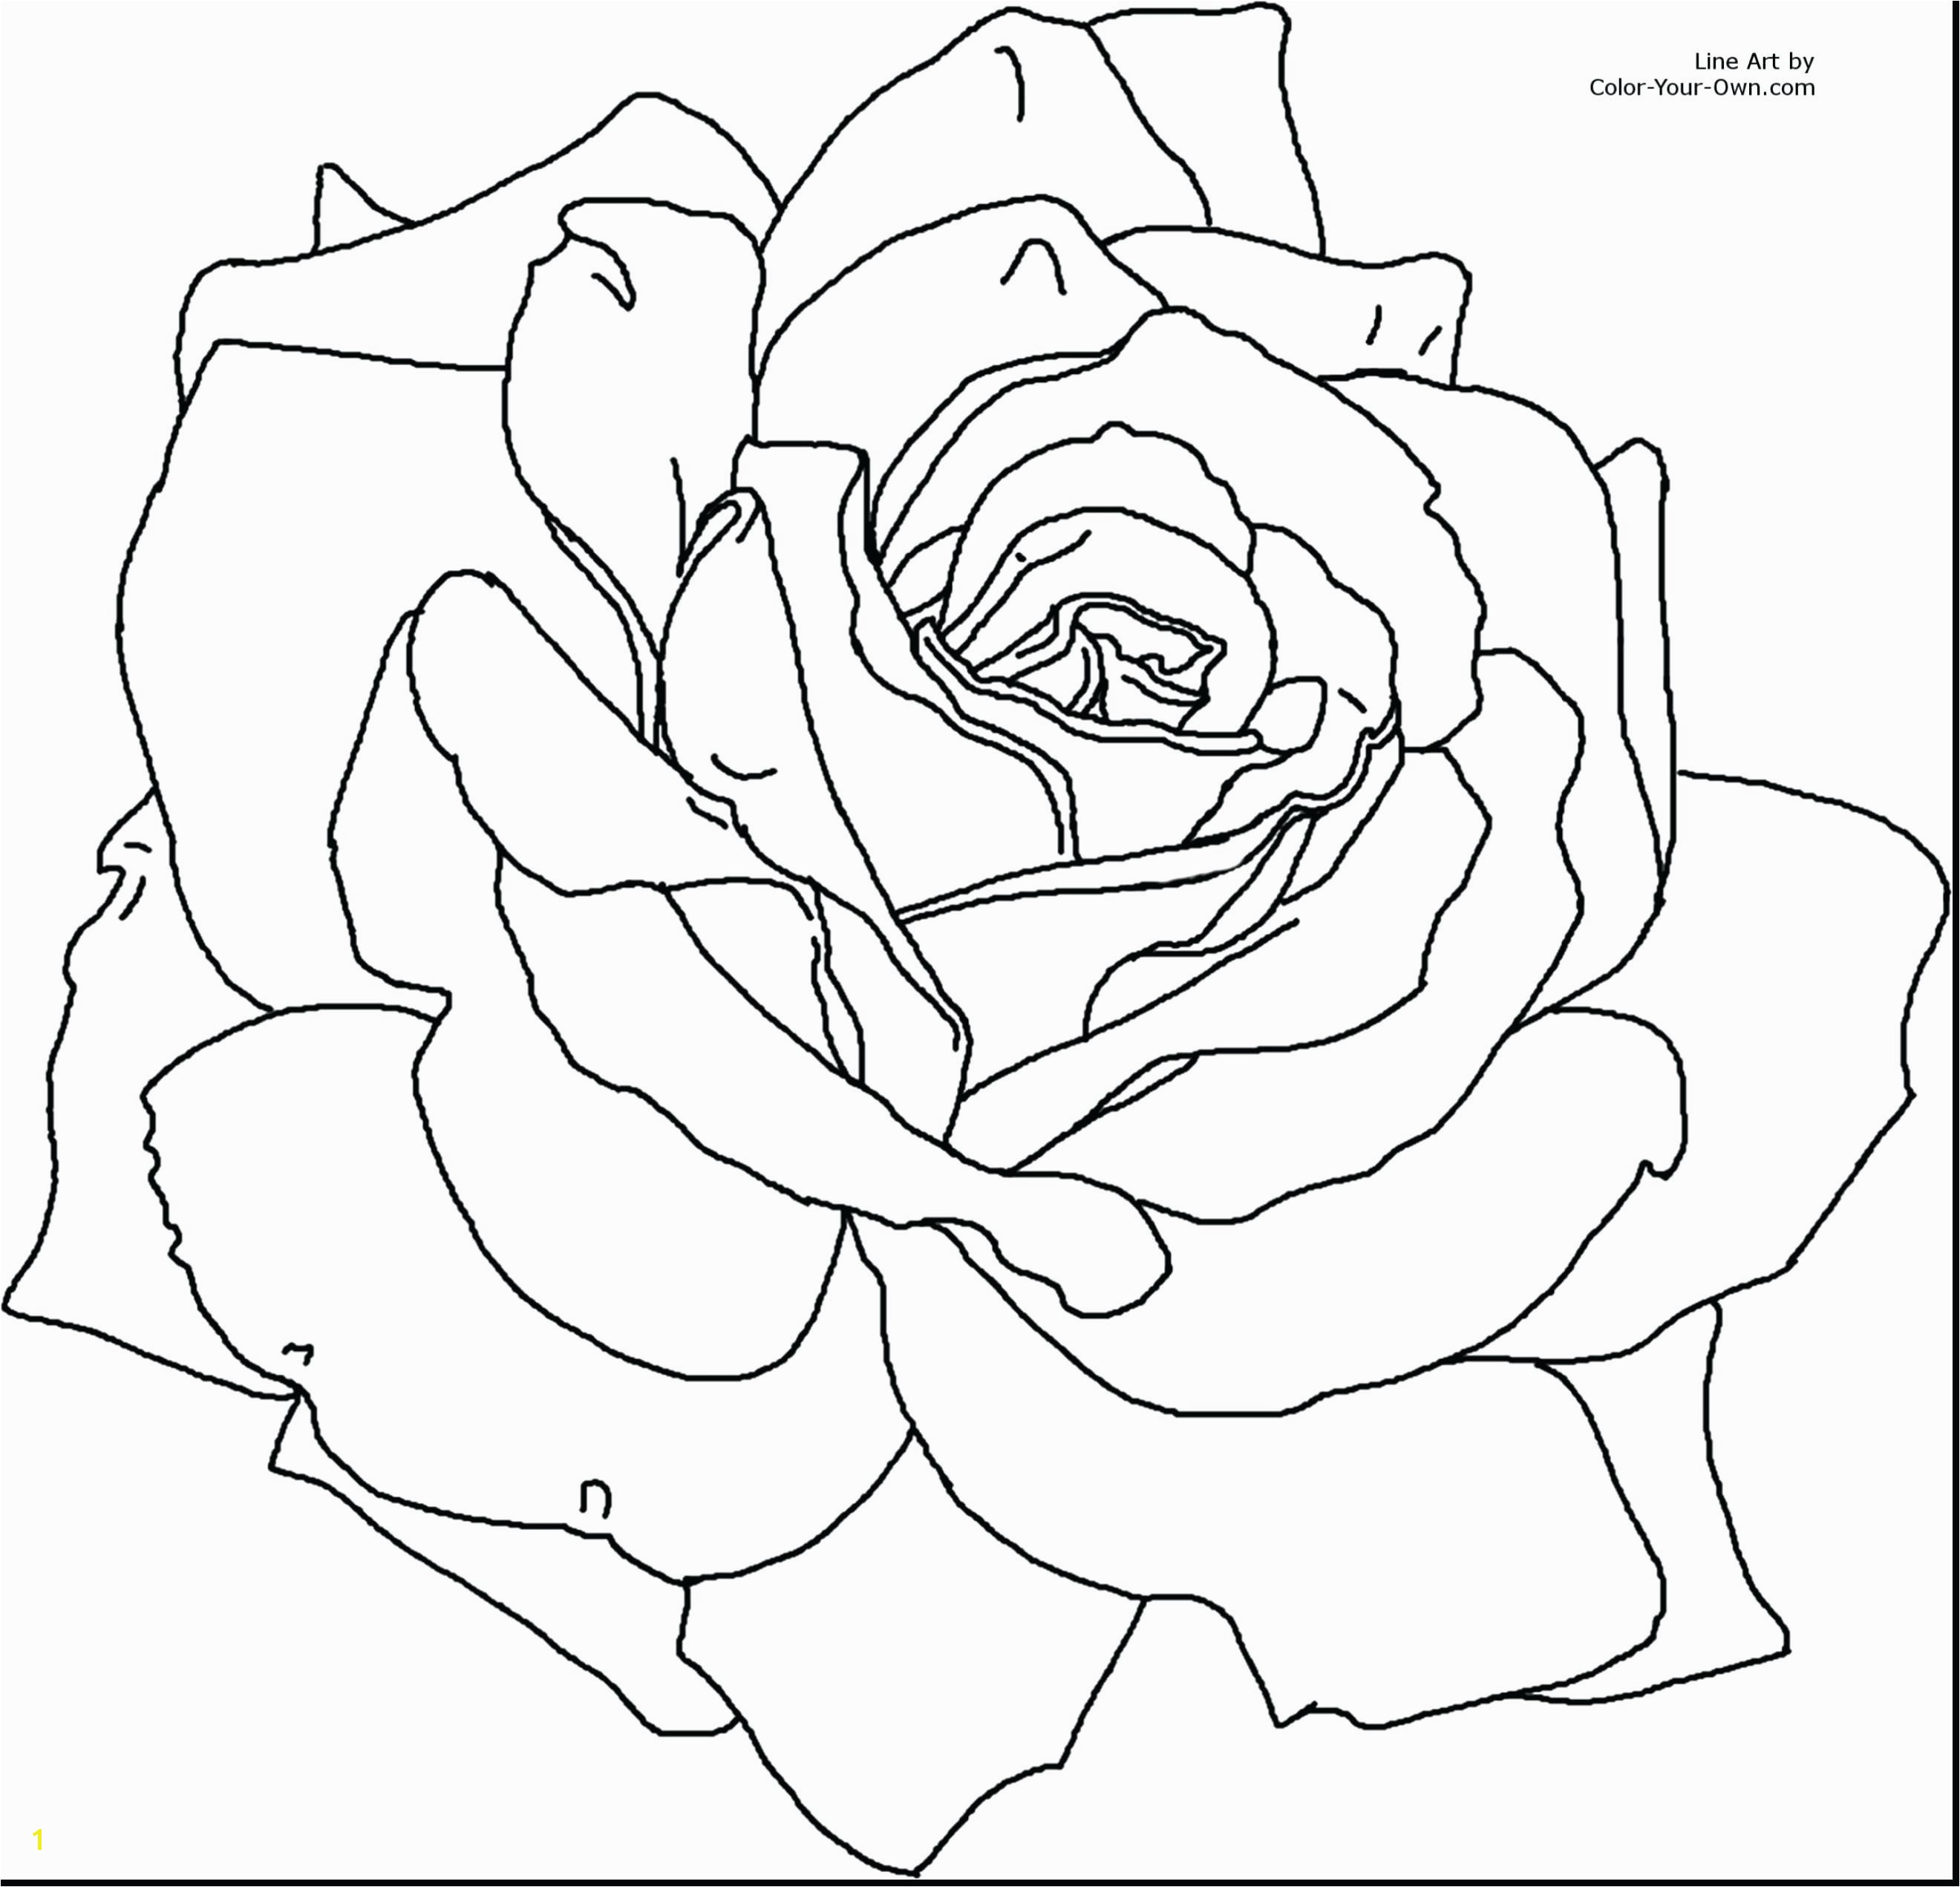 Flowers Coloring Pages Printable Lovely Pretty Coloring Pages Flowers Collection Printable